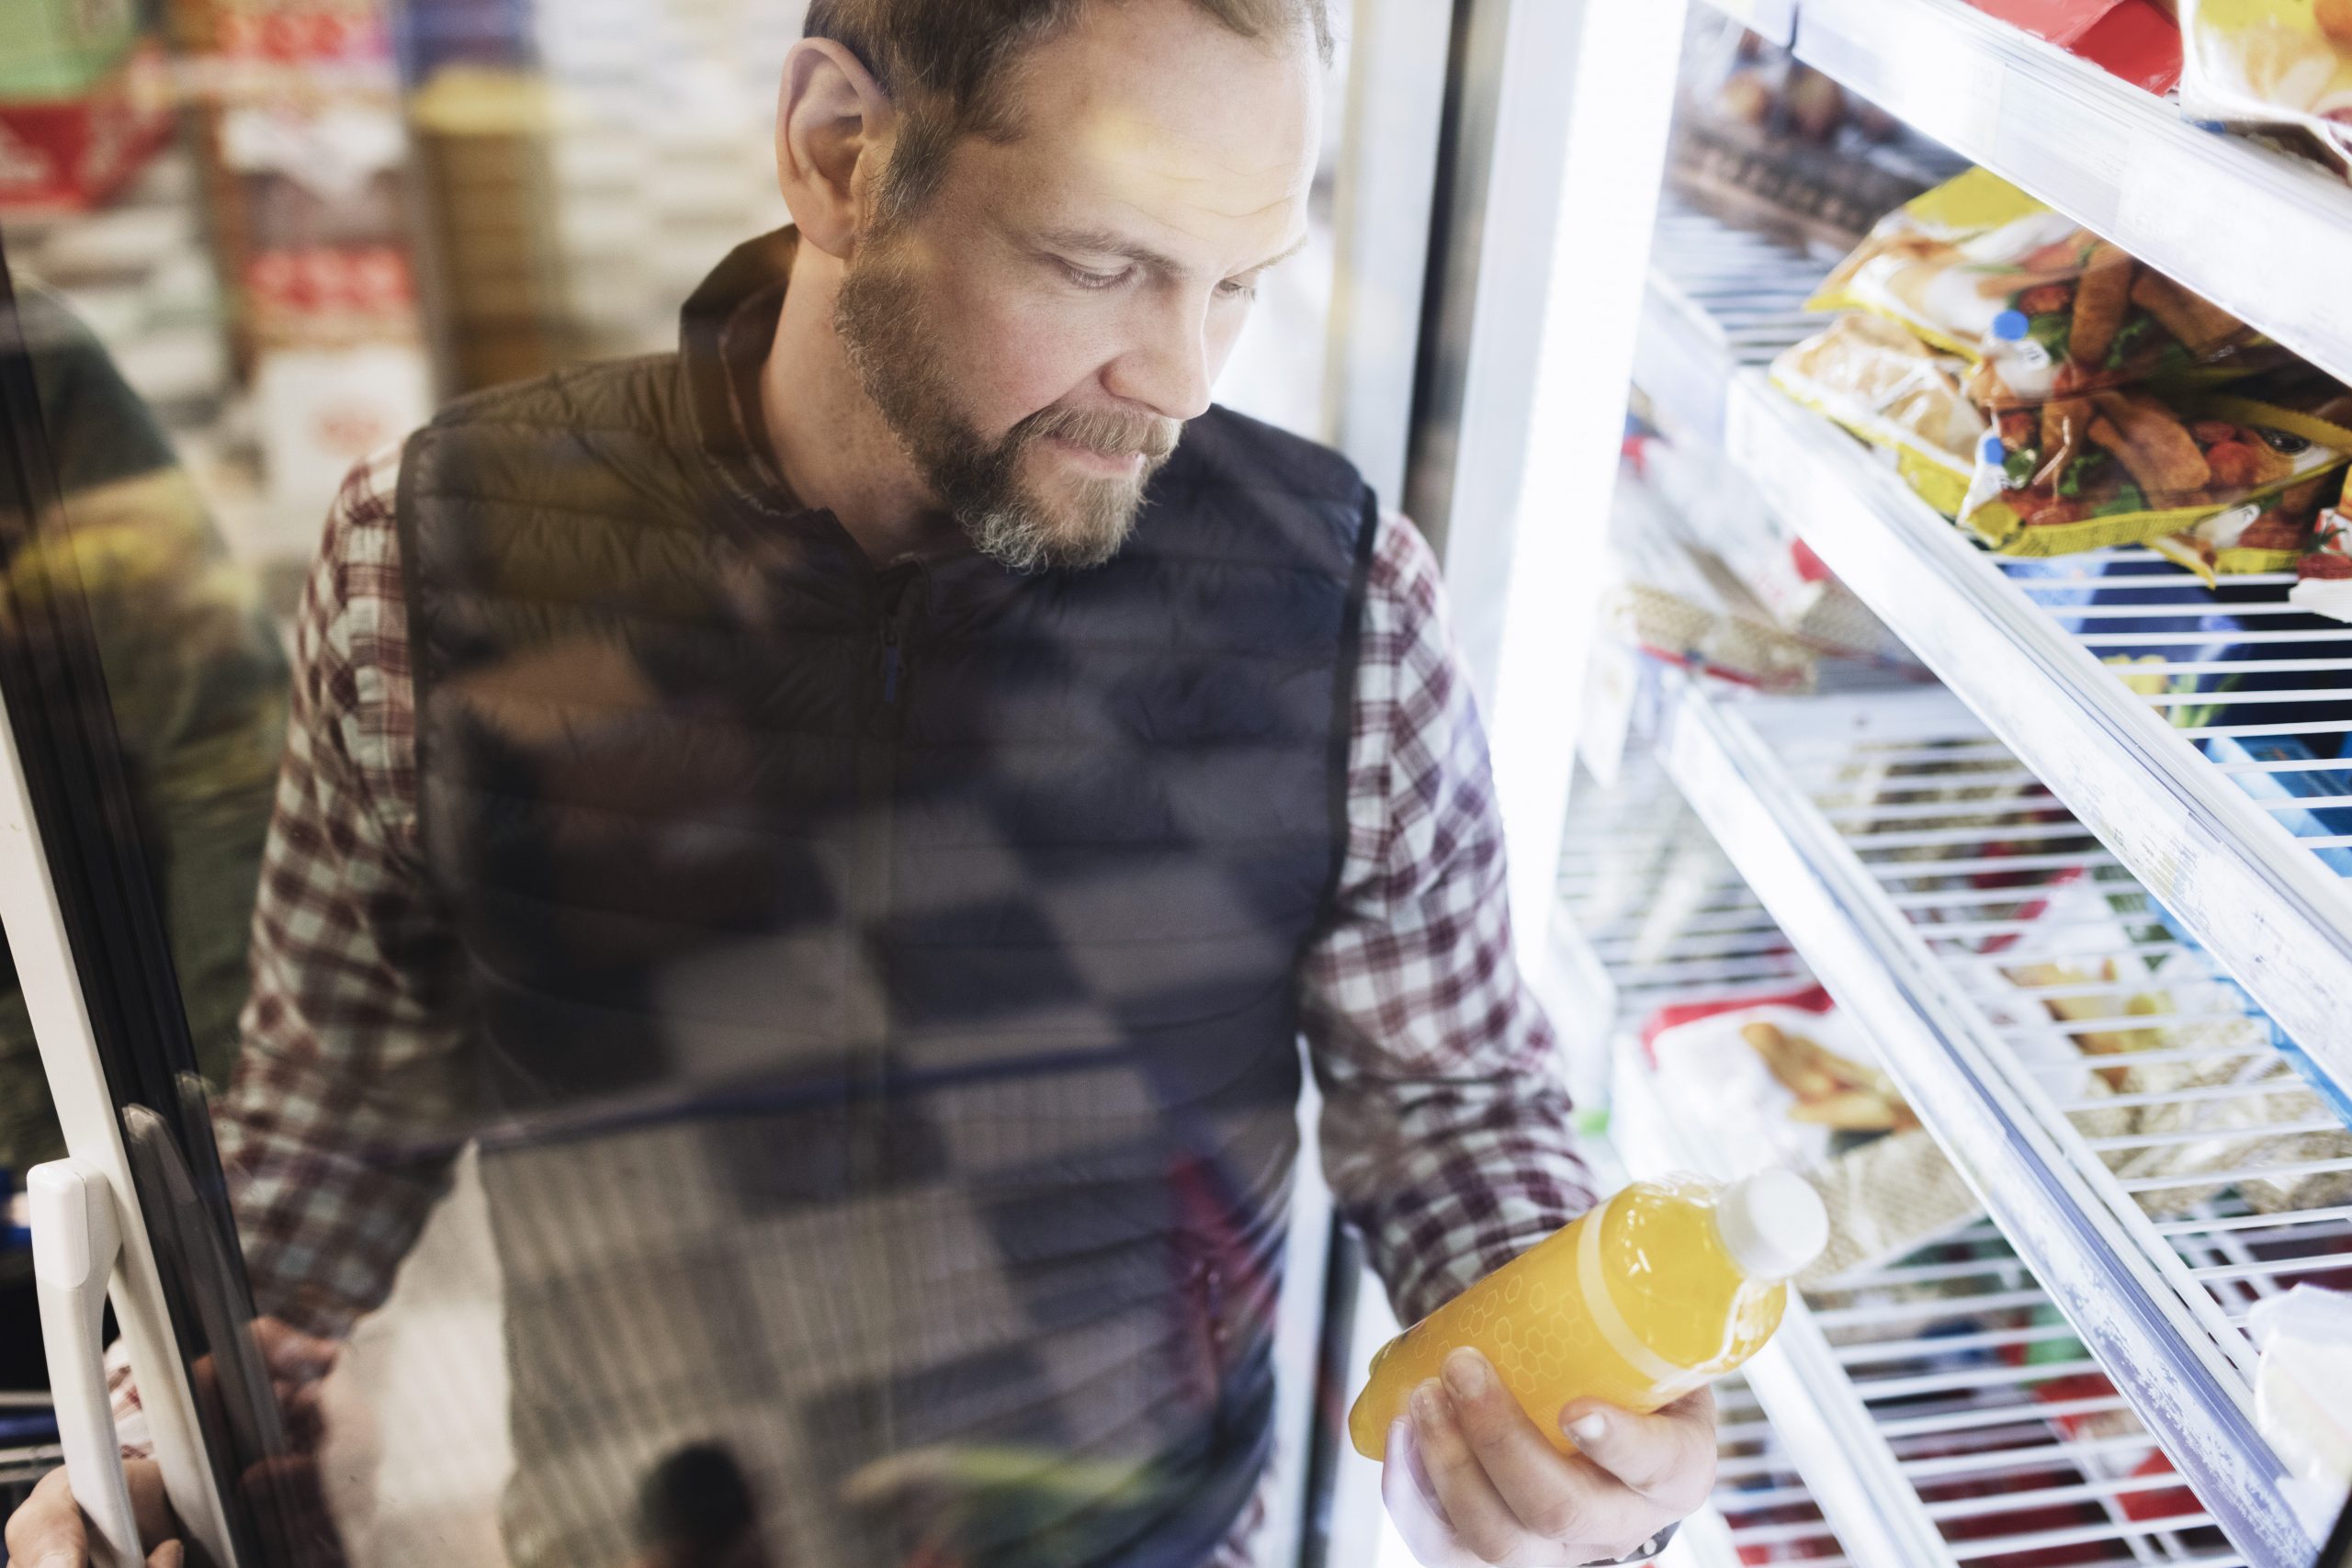 NielsenIQ report highlights top FMCG trends for retailers to tap into